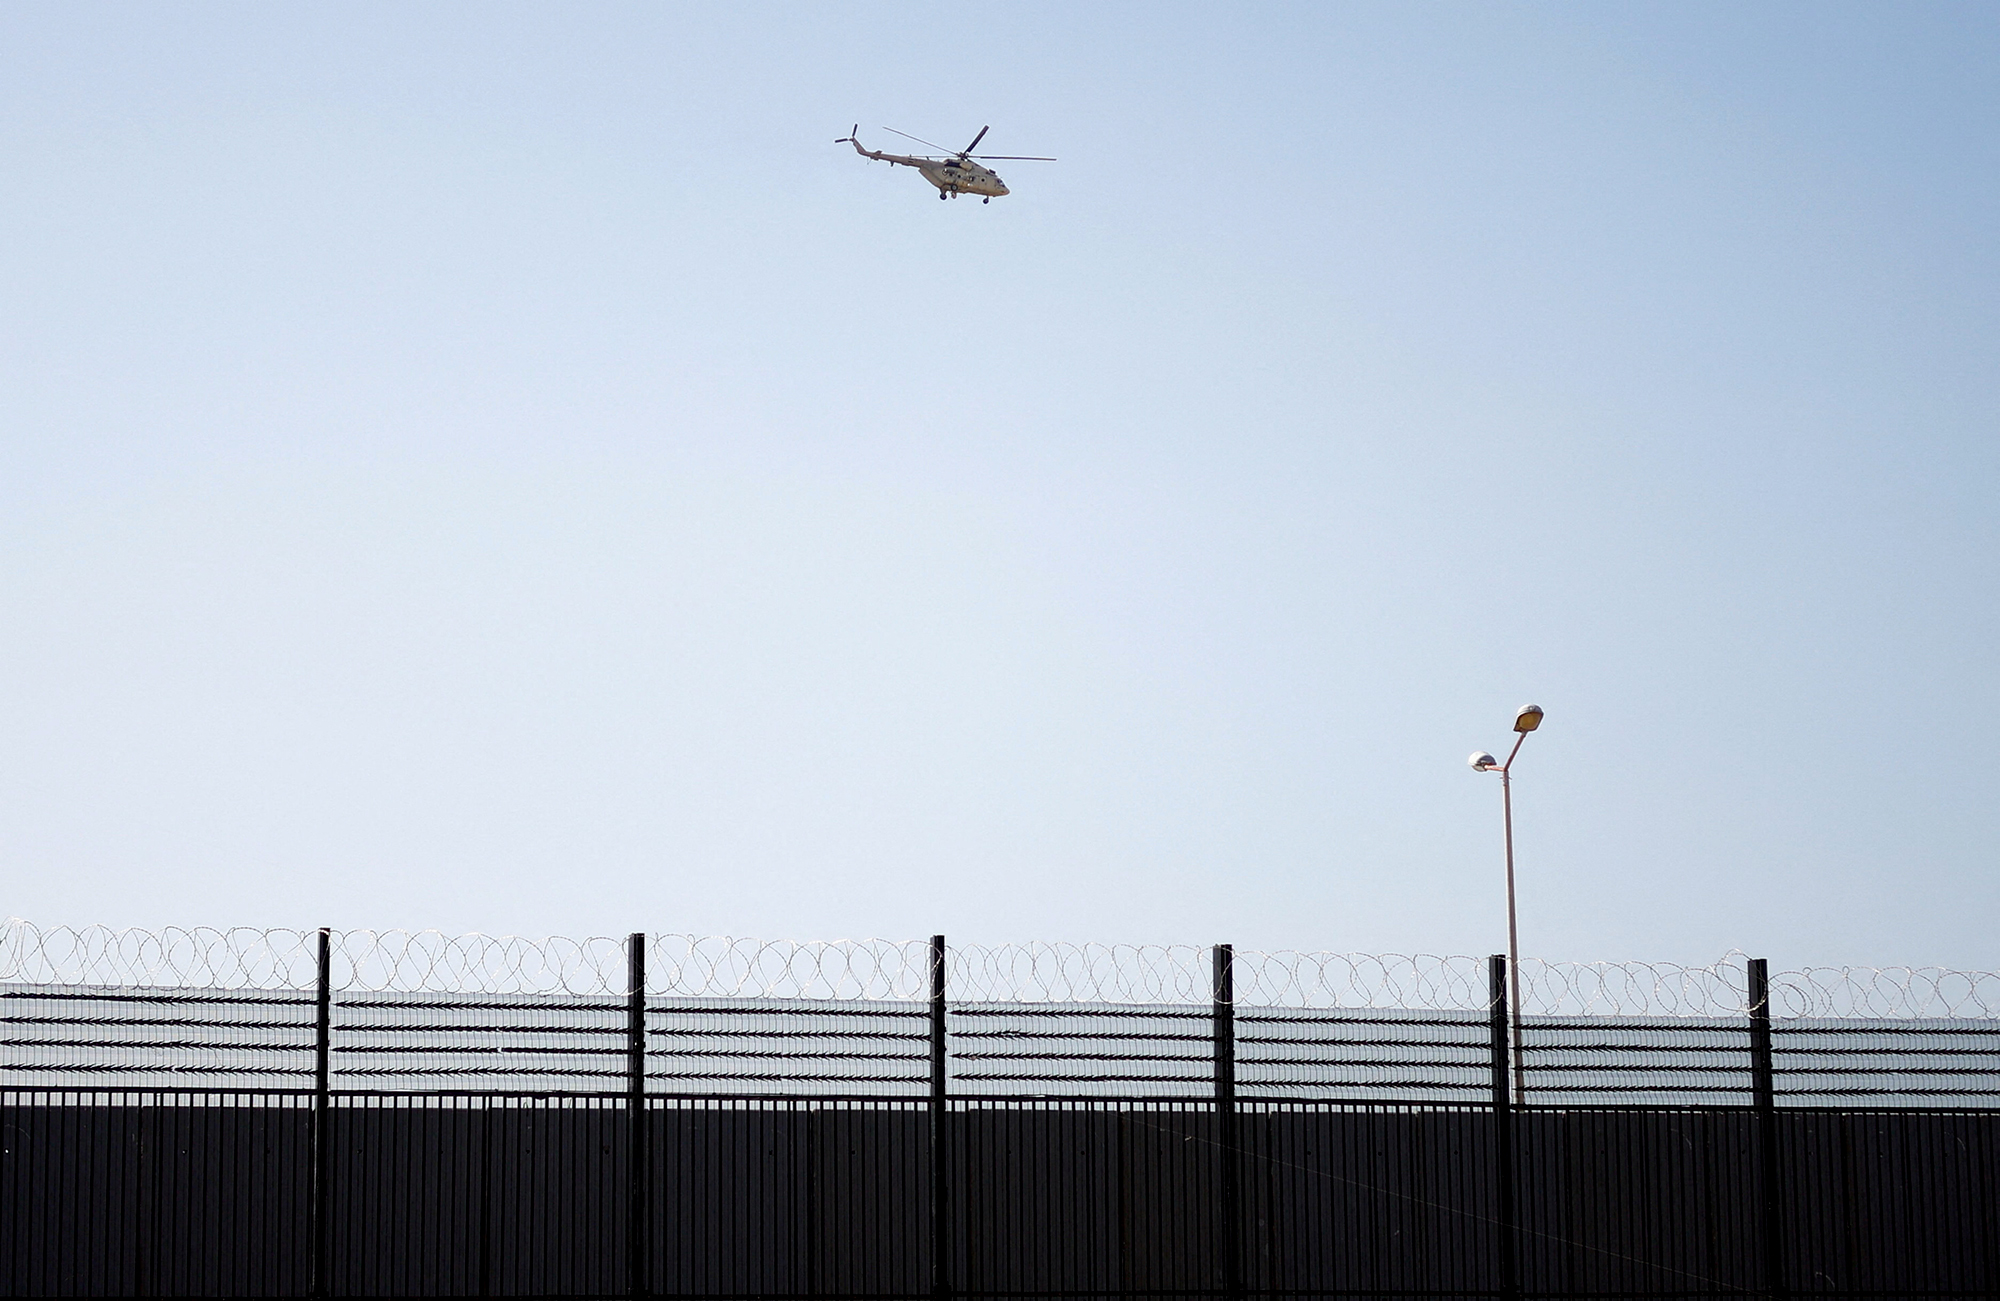 An Egyptian helicopter patrols the fortified border area between Egypt and Gaza as seen from Rafah, Gaza, on February 7.